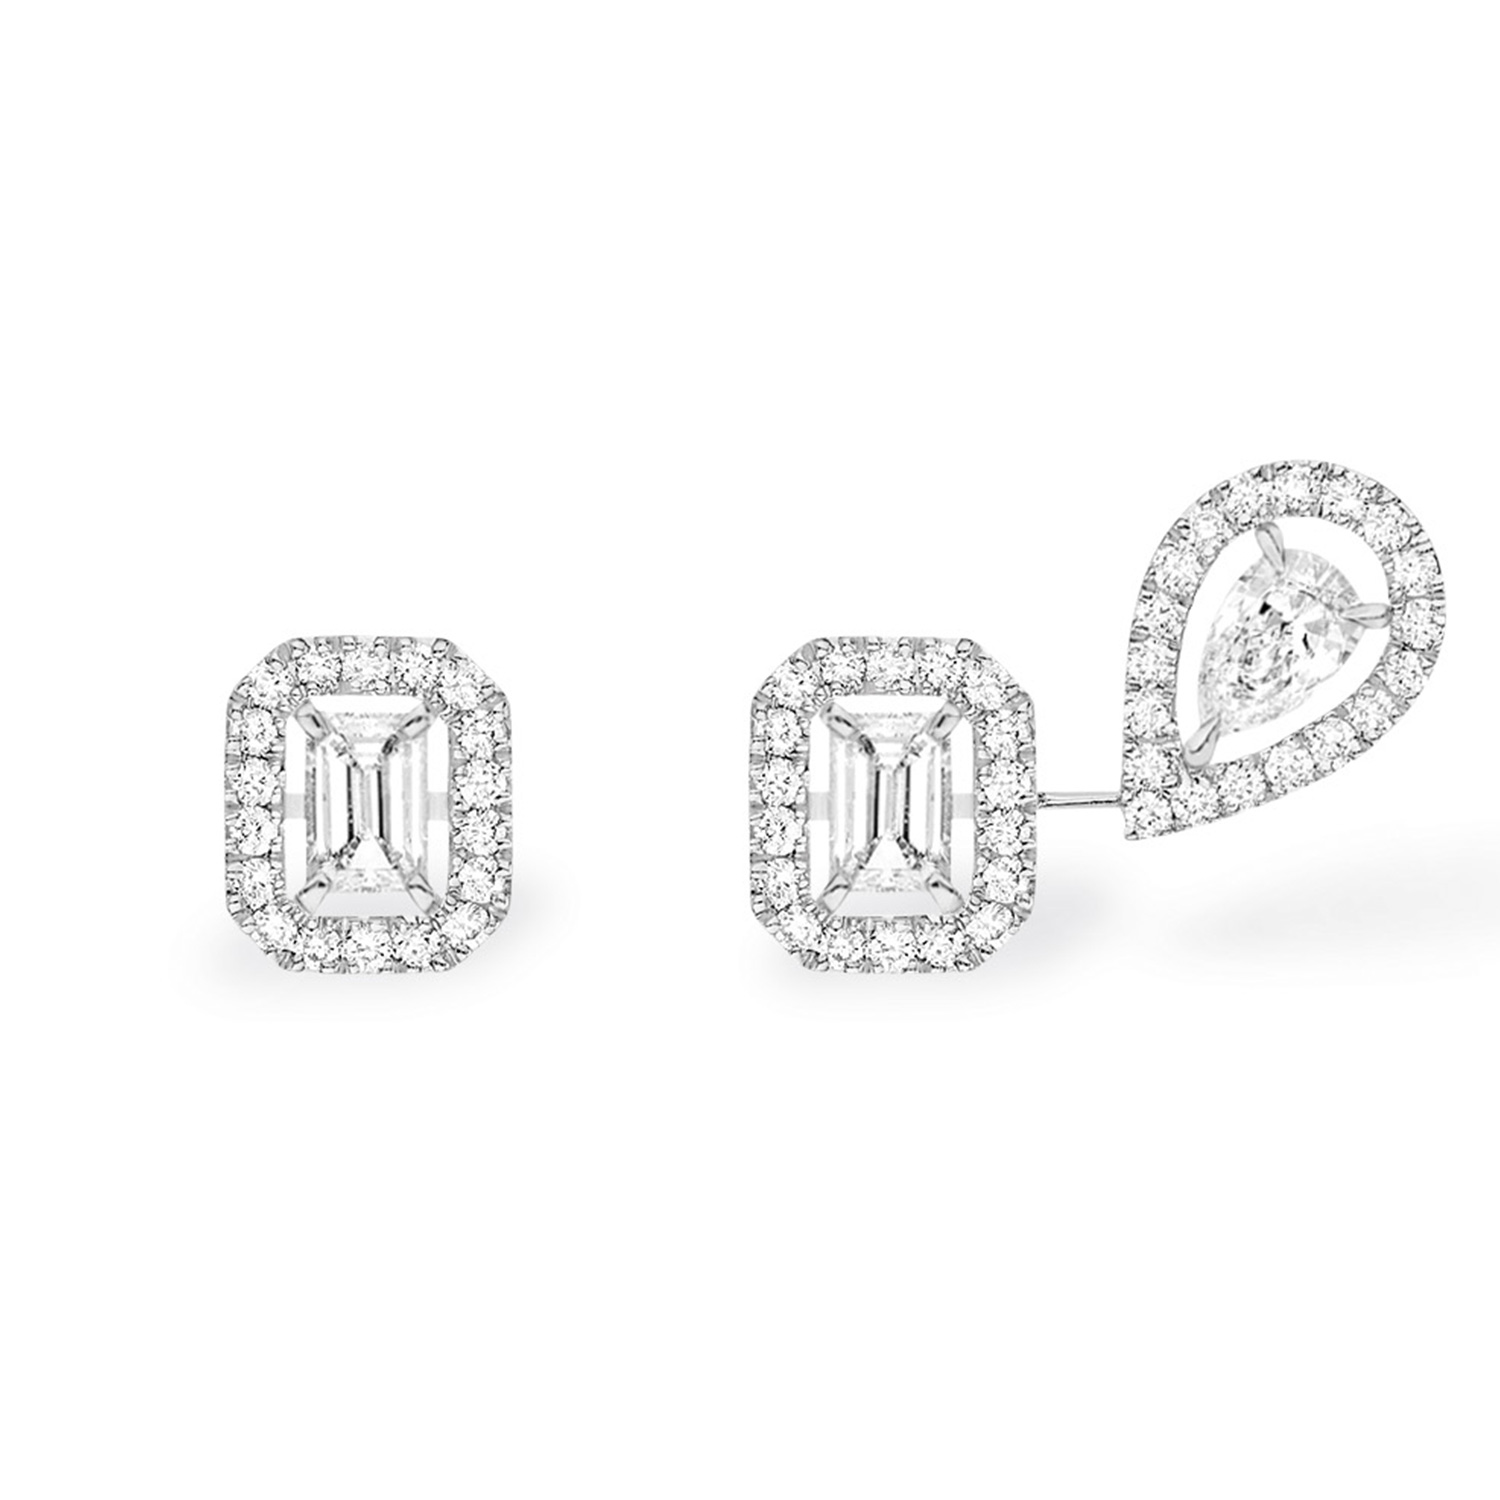 Boucles d'oreilles my twin 1+2 0,10ct - Messika